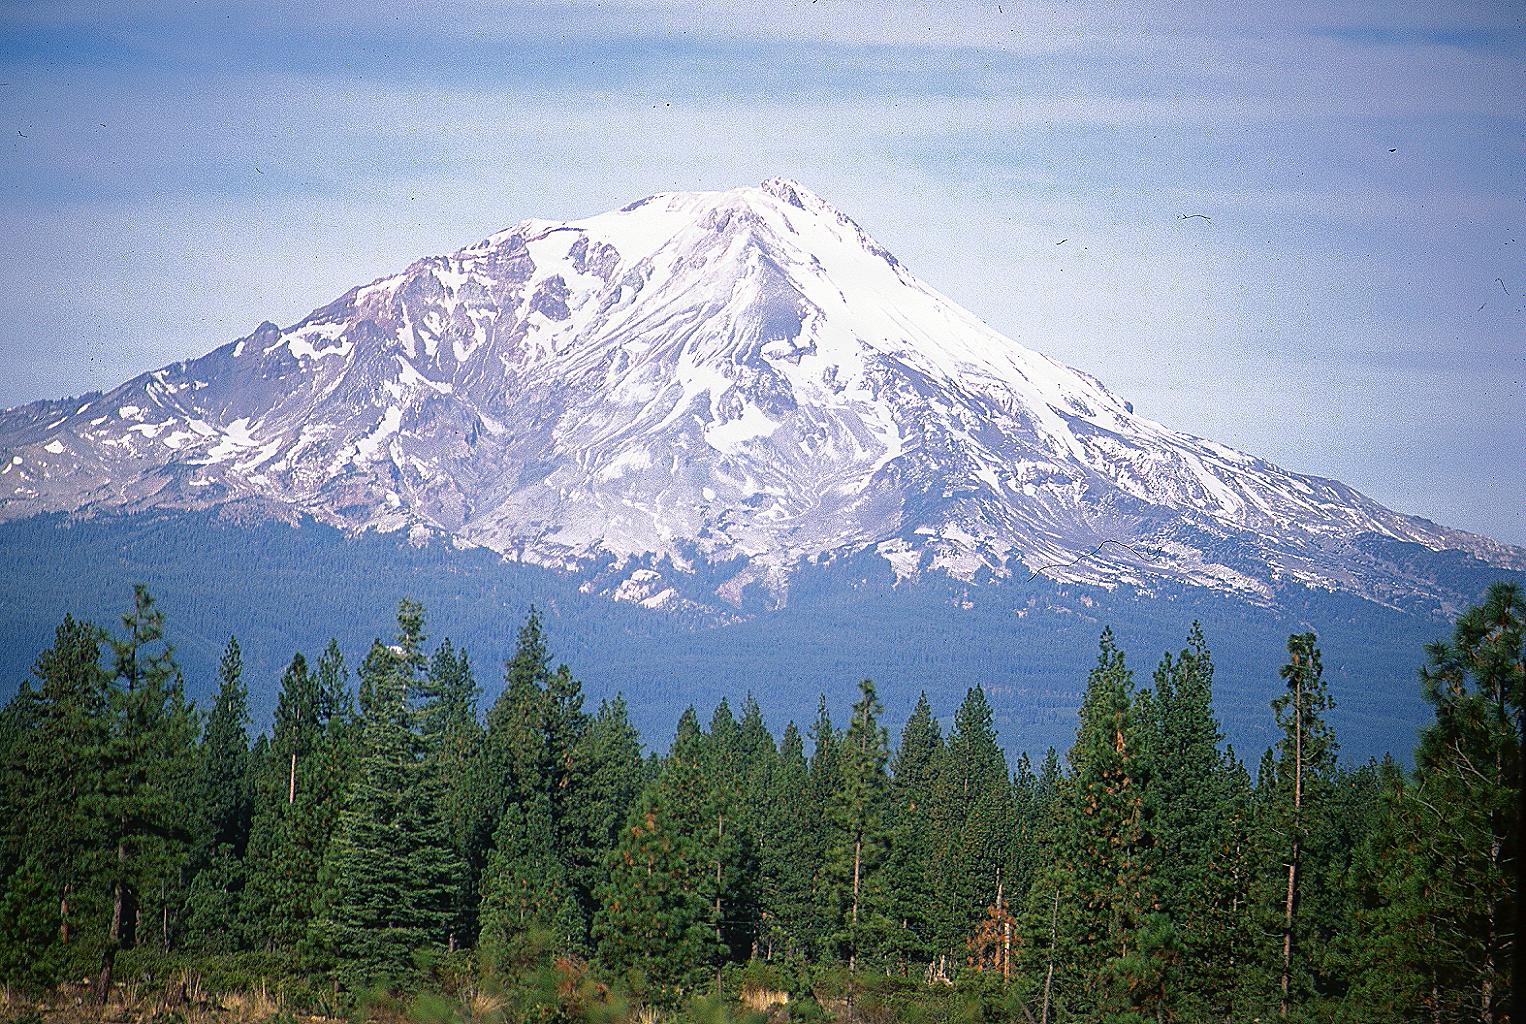 Mt Shasta Snow Capped with trees in foreground